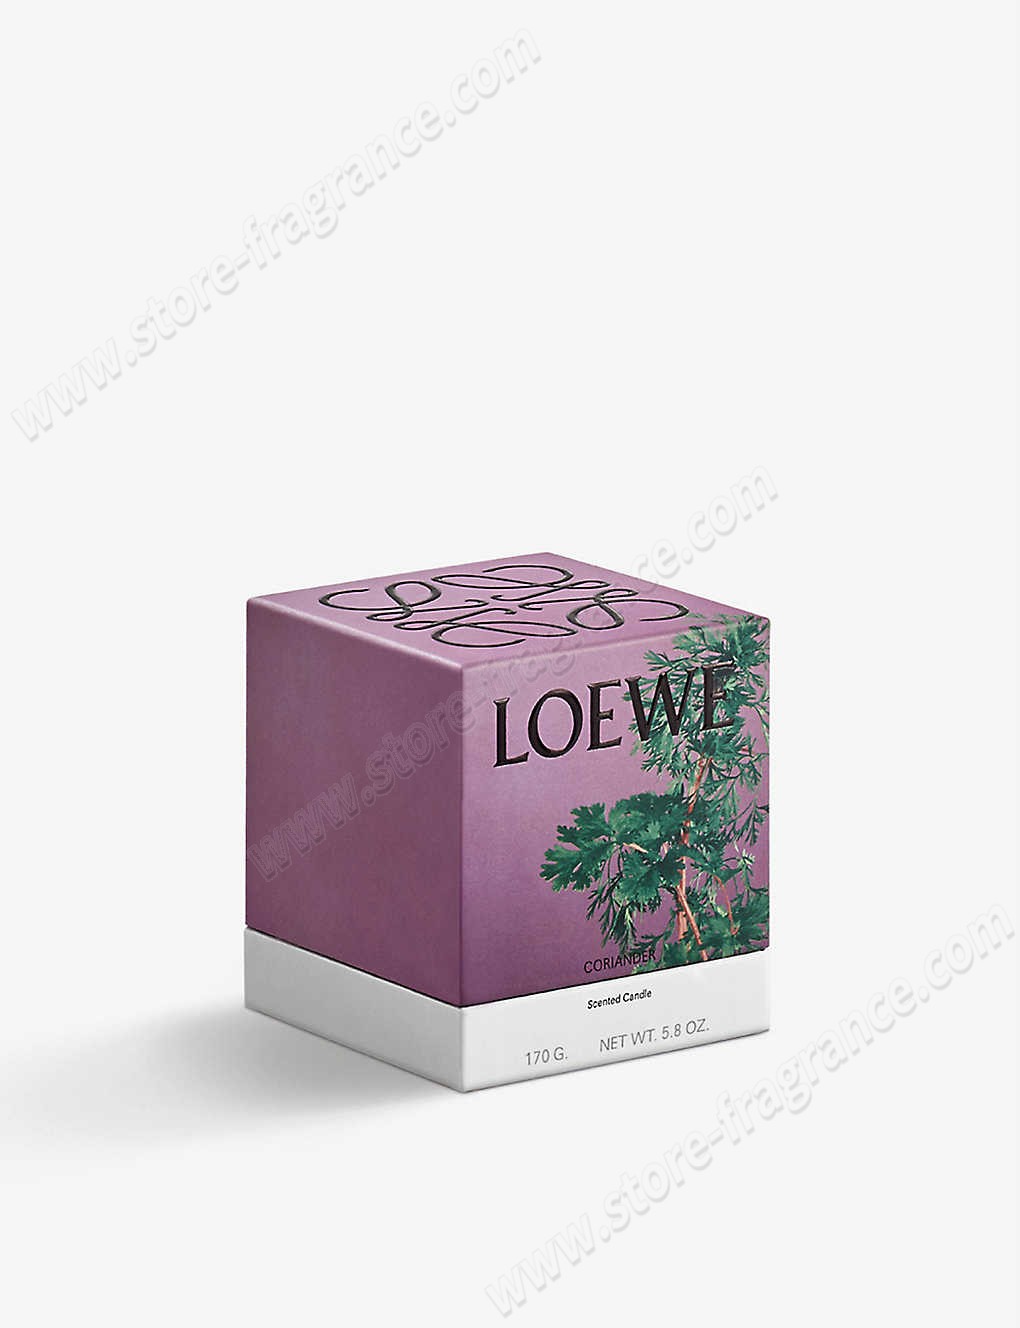 LOEWE/Coriander scented candle 170g ✿ Discount Store - -1